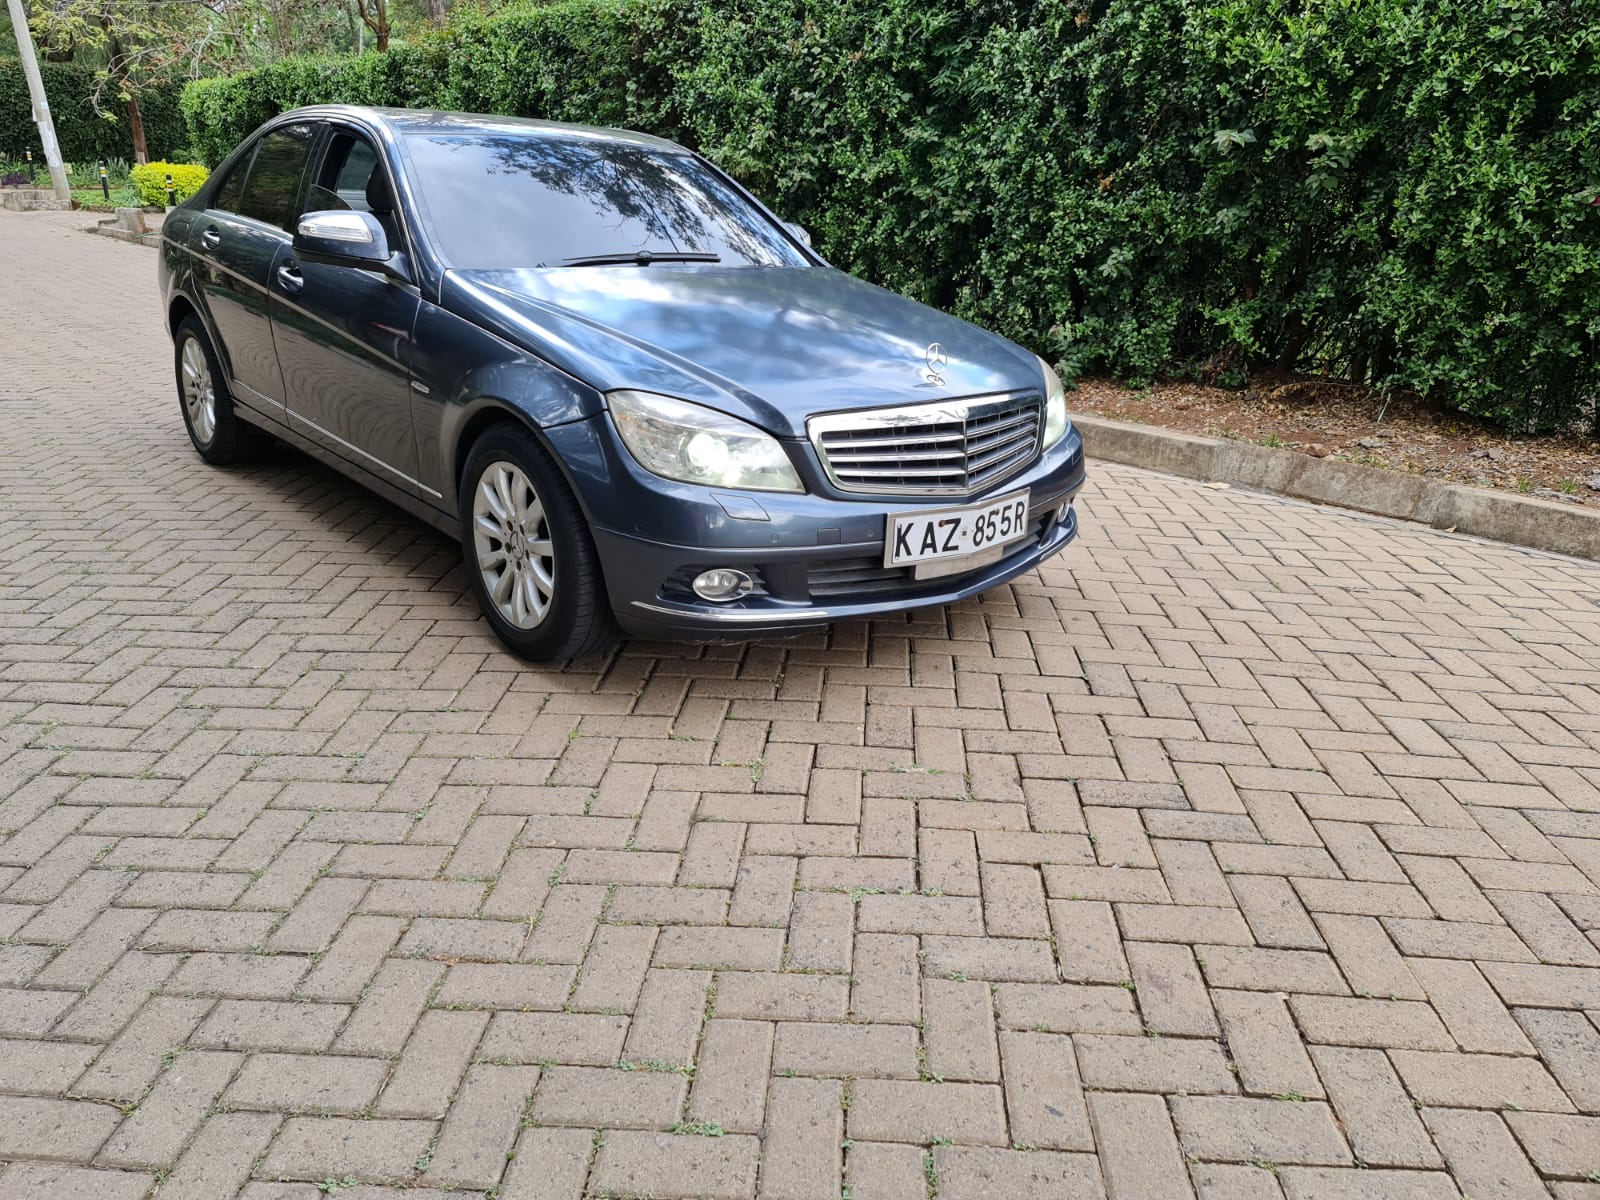 Mercedes Benz C200 Local 2007 on Offer As New